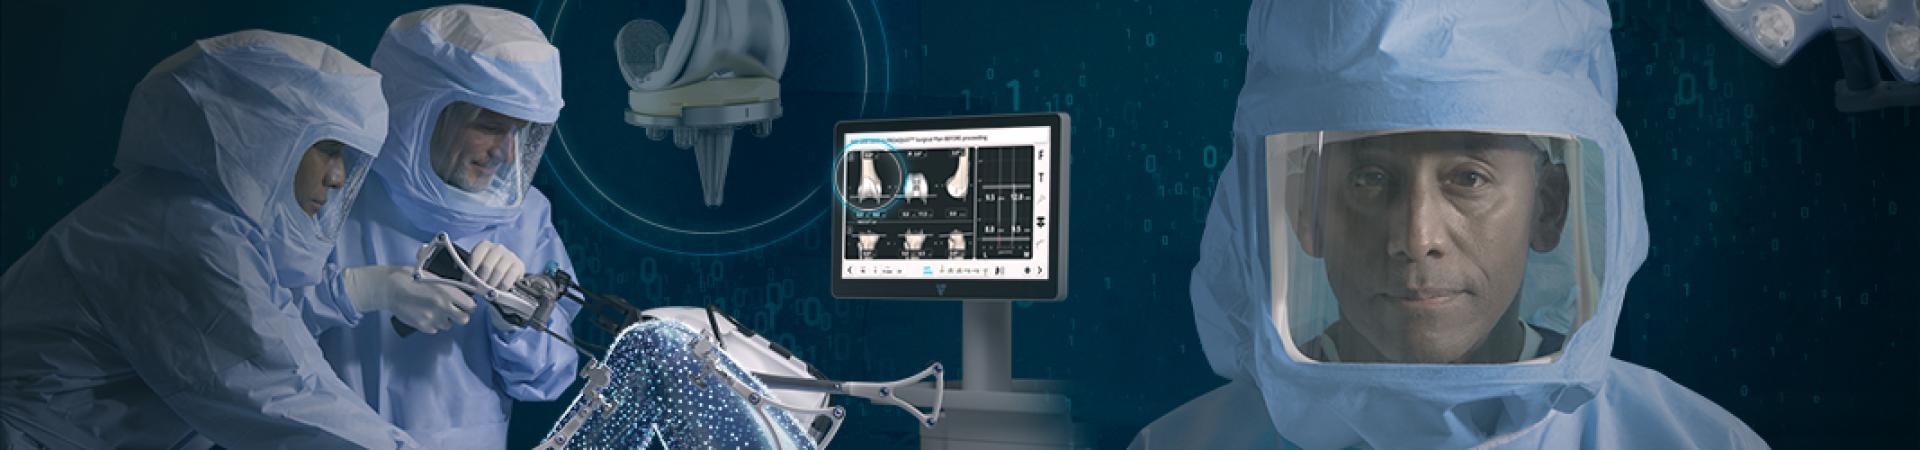 VELYS™ Robotic-Assisted Solution Image